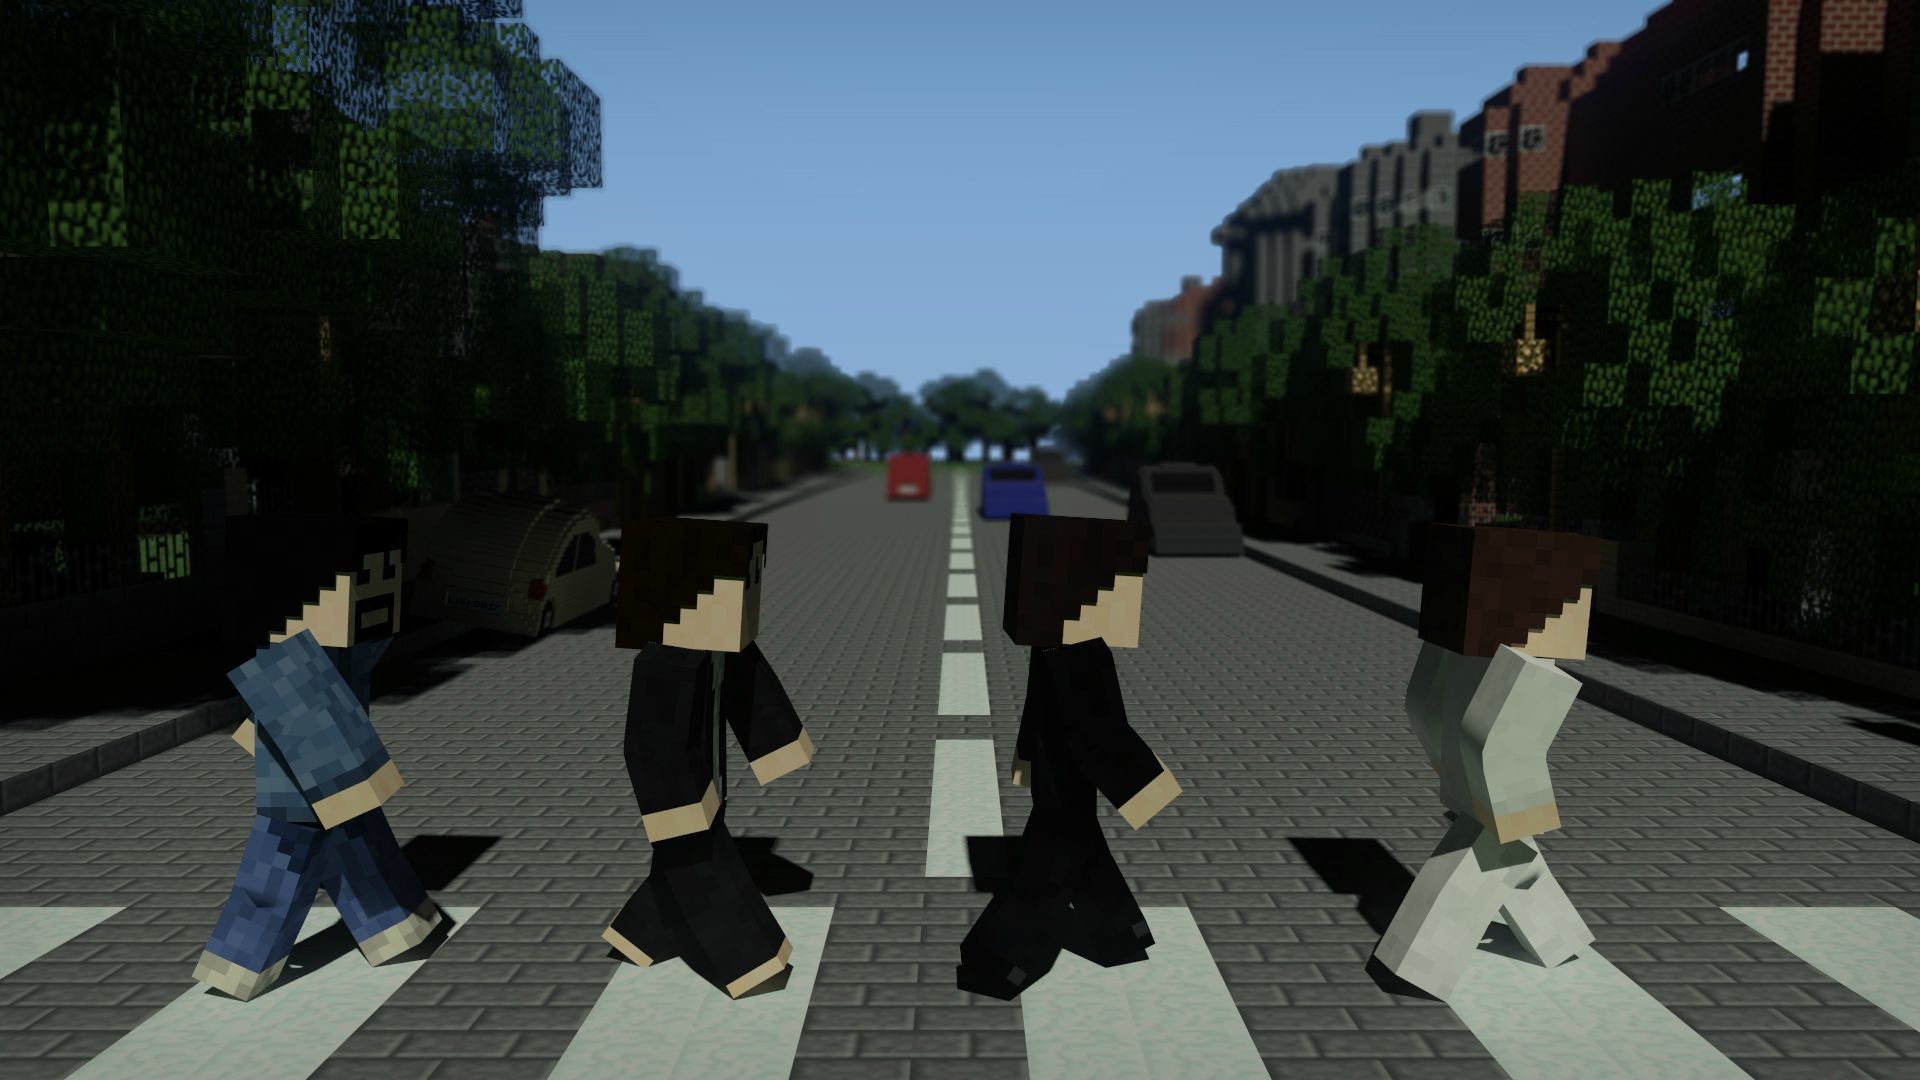 1920x1080 Caacaeabd Abbey Road The Beatles Wallpaper Wp2001072